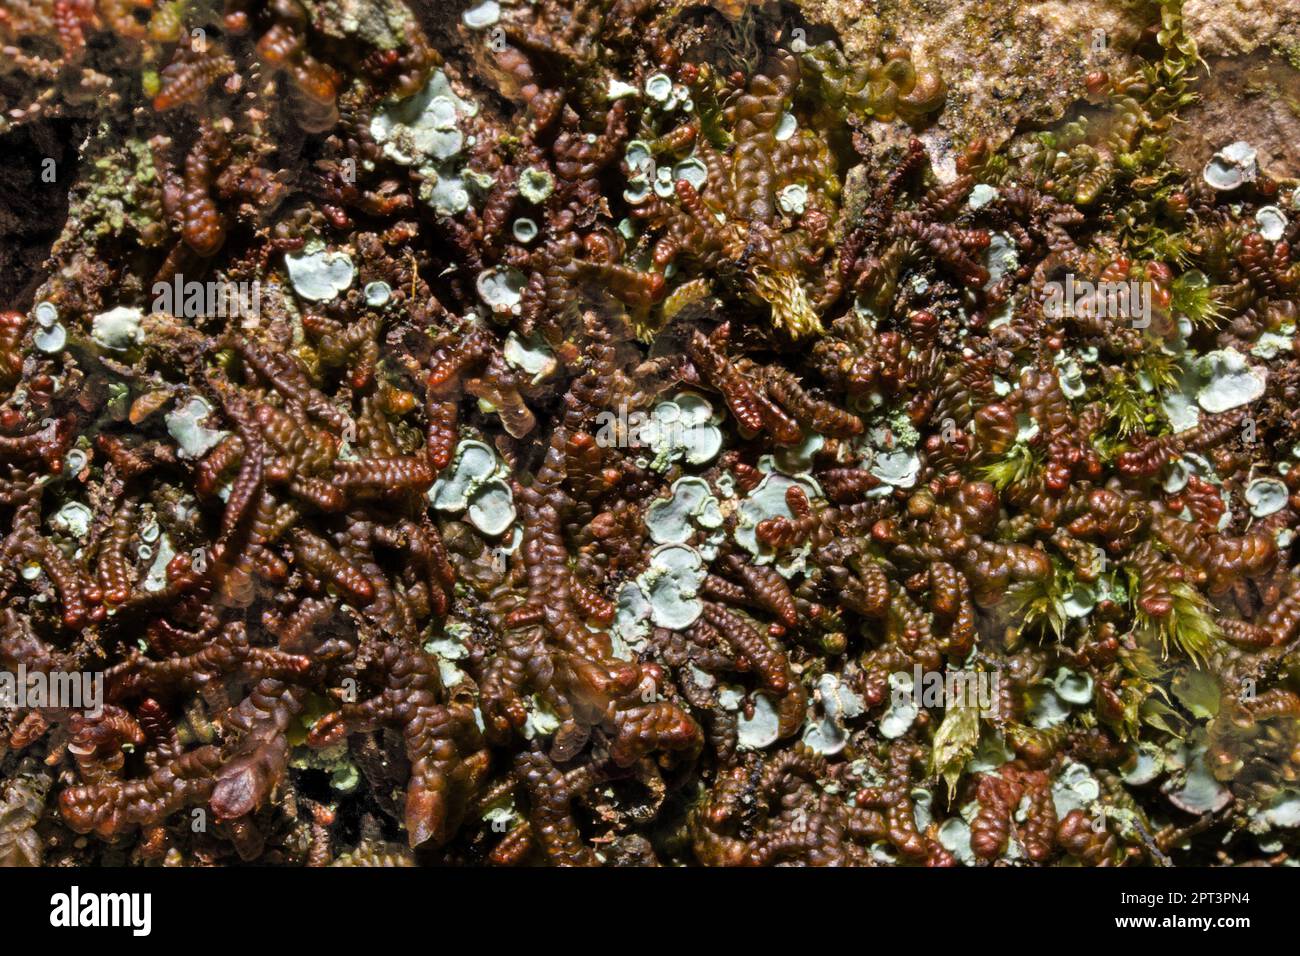 Normandina pulchella is a squamulose lichen common among bryophytes on shaded trees especially Frullania. It has a global distribution. Stock Photo